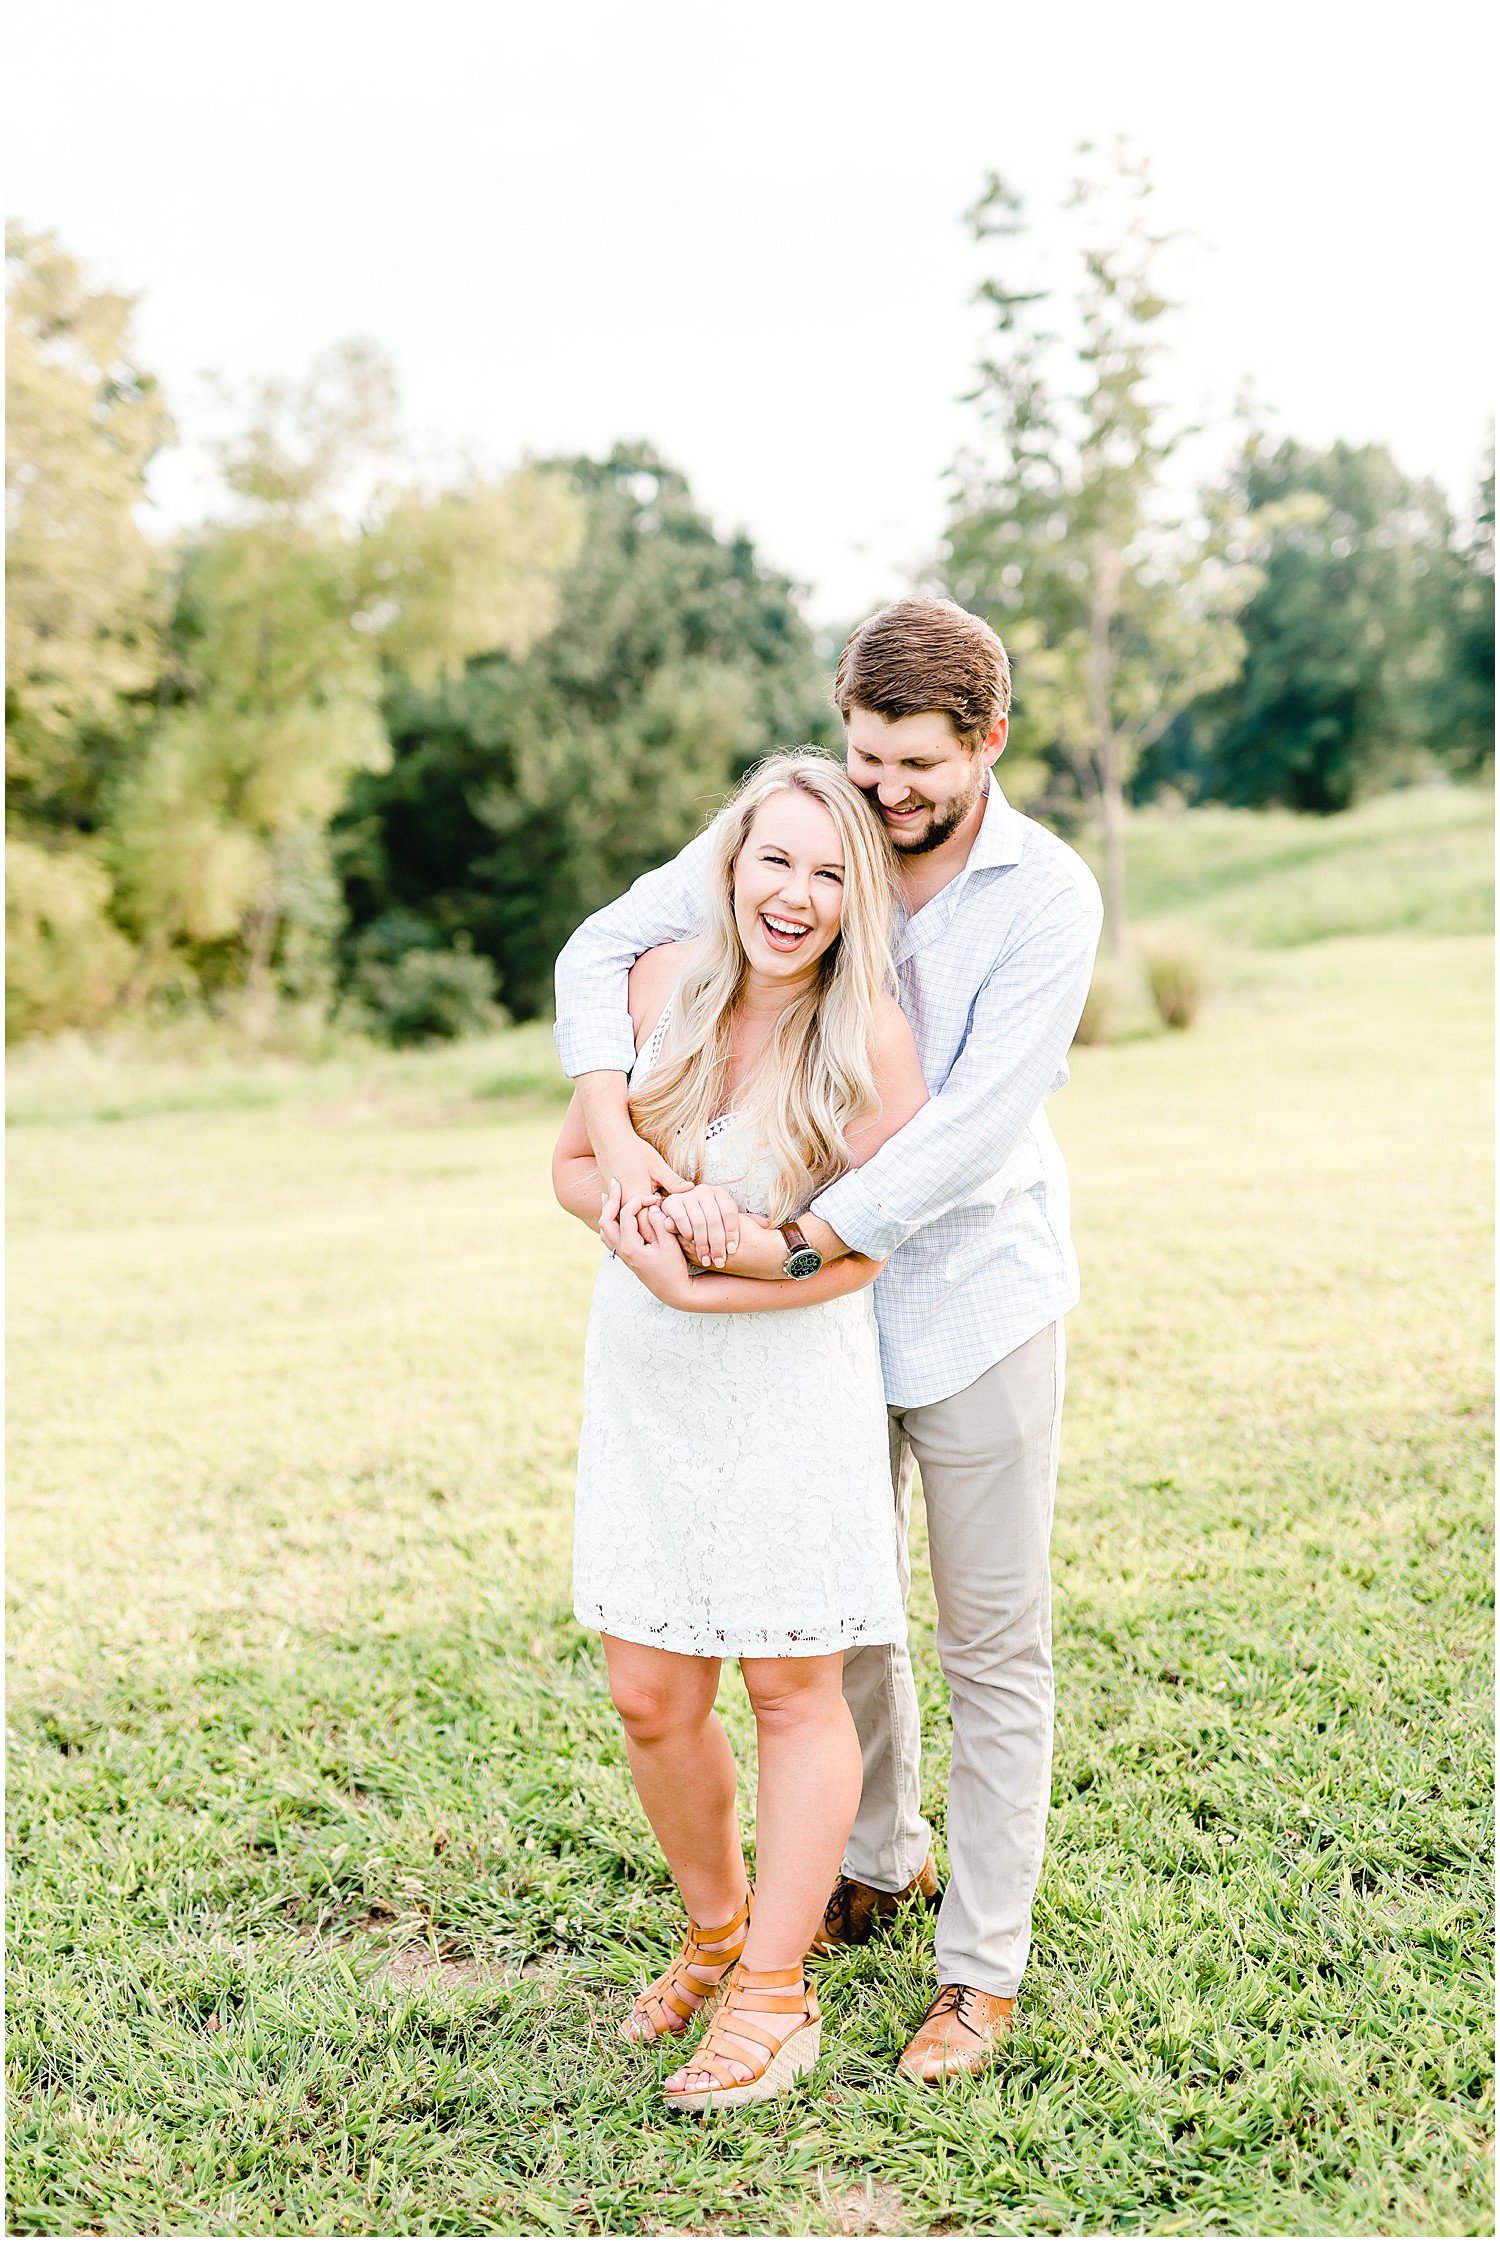 Cooper's ridge engagement session couple dancing in grass